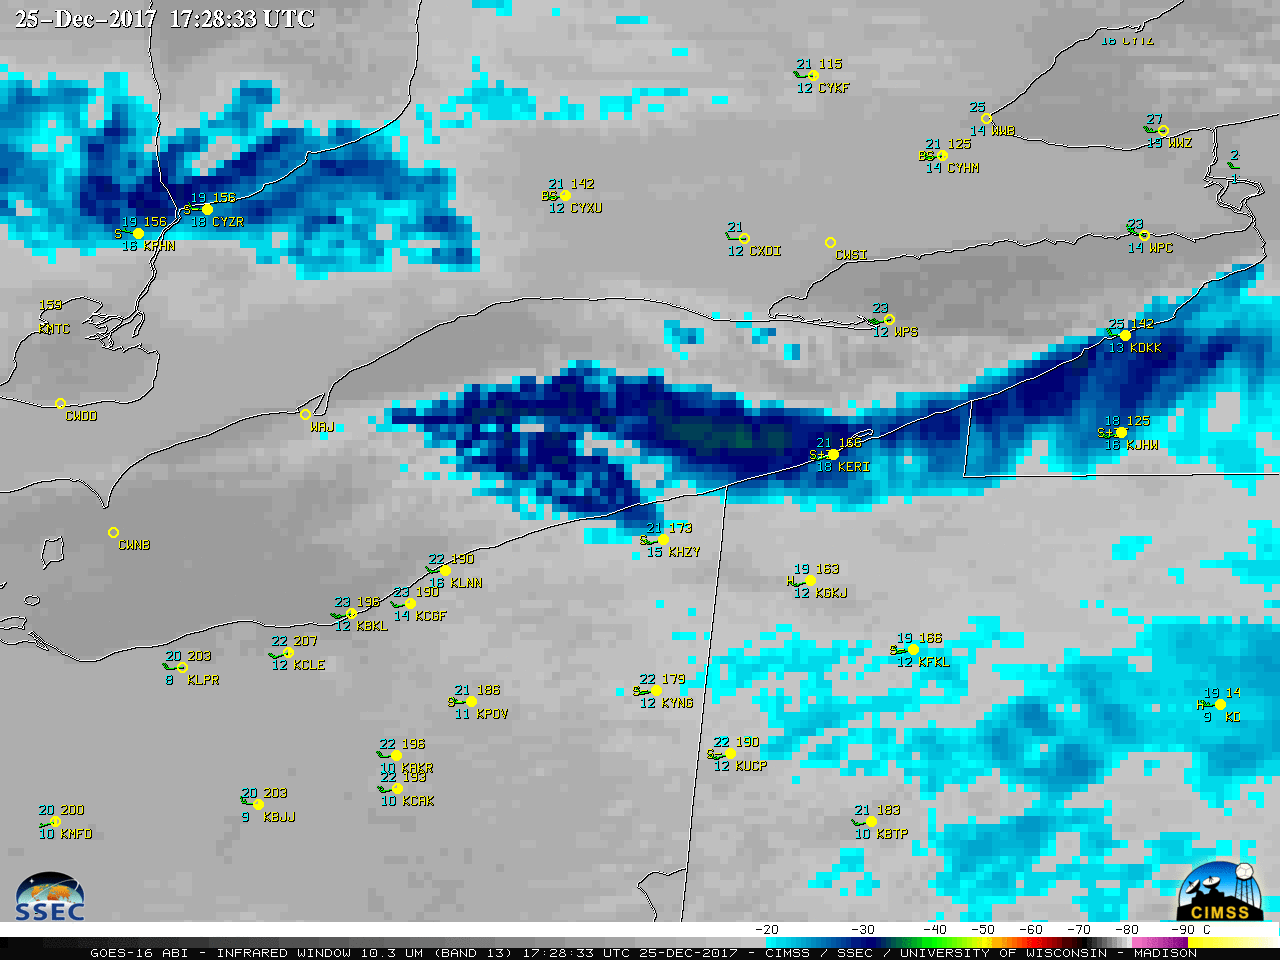 1-minute GOES-16 "Clean" Infrared Window (10.3 µm) images, with hourly surface reports plotted in cyan/yellow [click to play MP4 animation]